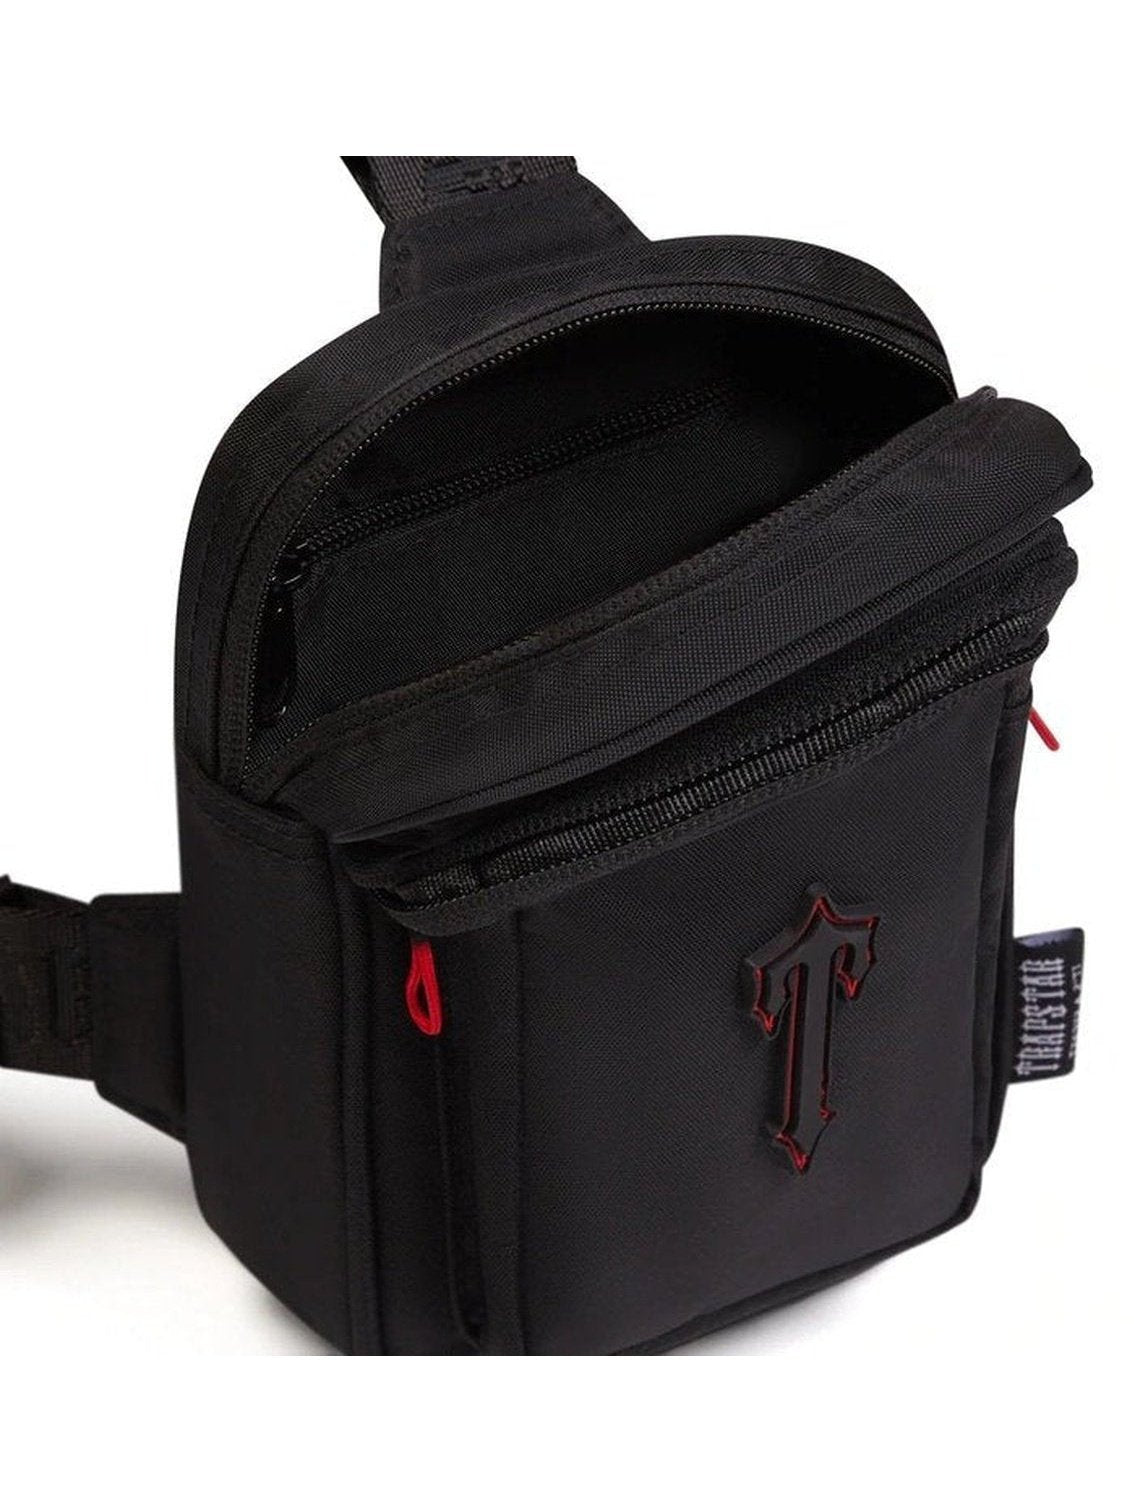 Trapstar Small Items Bag Black/Red